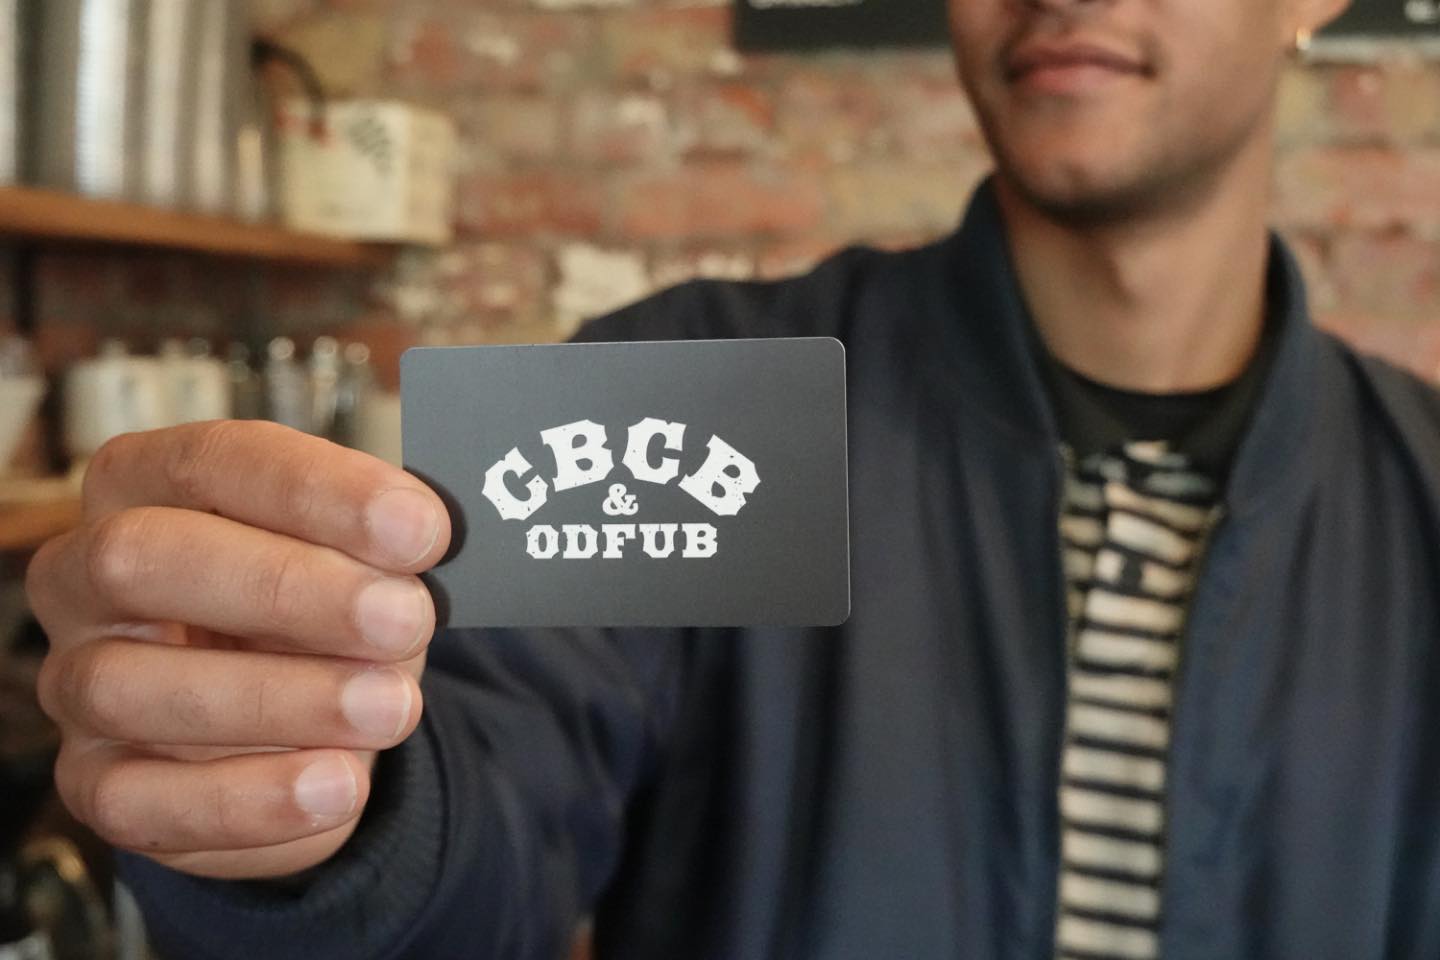 CBCB Gift Cards! Look how pretty they are! 

Buy it. Gift it. Recharge it. Live it! 

What a time to be alive! 

⚡️

eGi